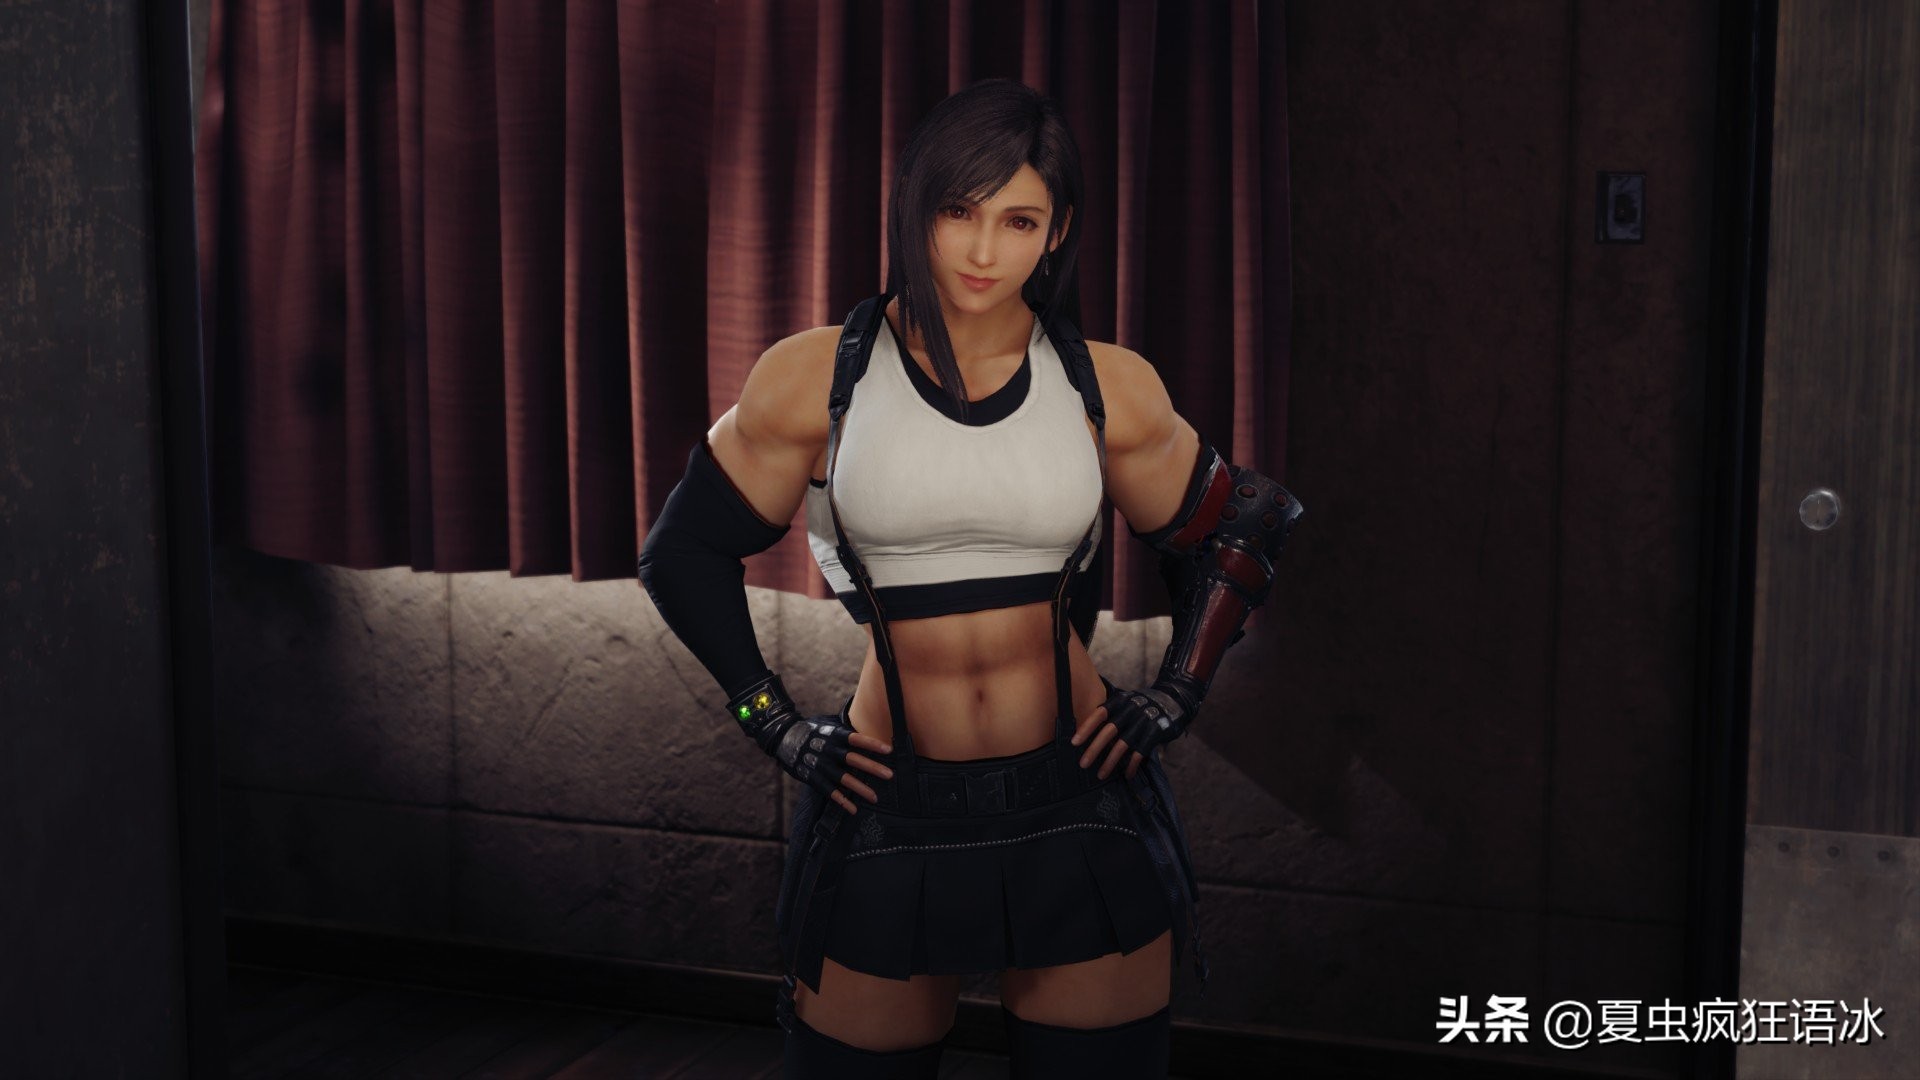 Final Fantasy 7 Remake Tifa Muscles Mod Launched This Is What It Looks Like To Be Combative